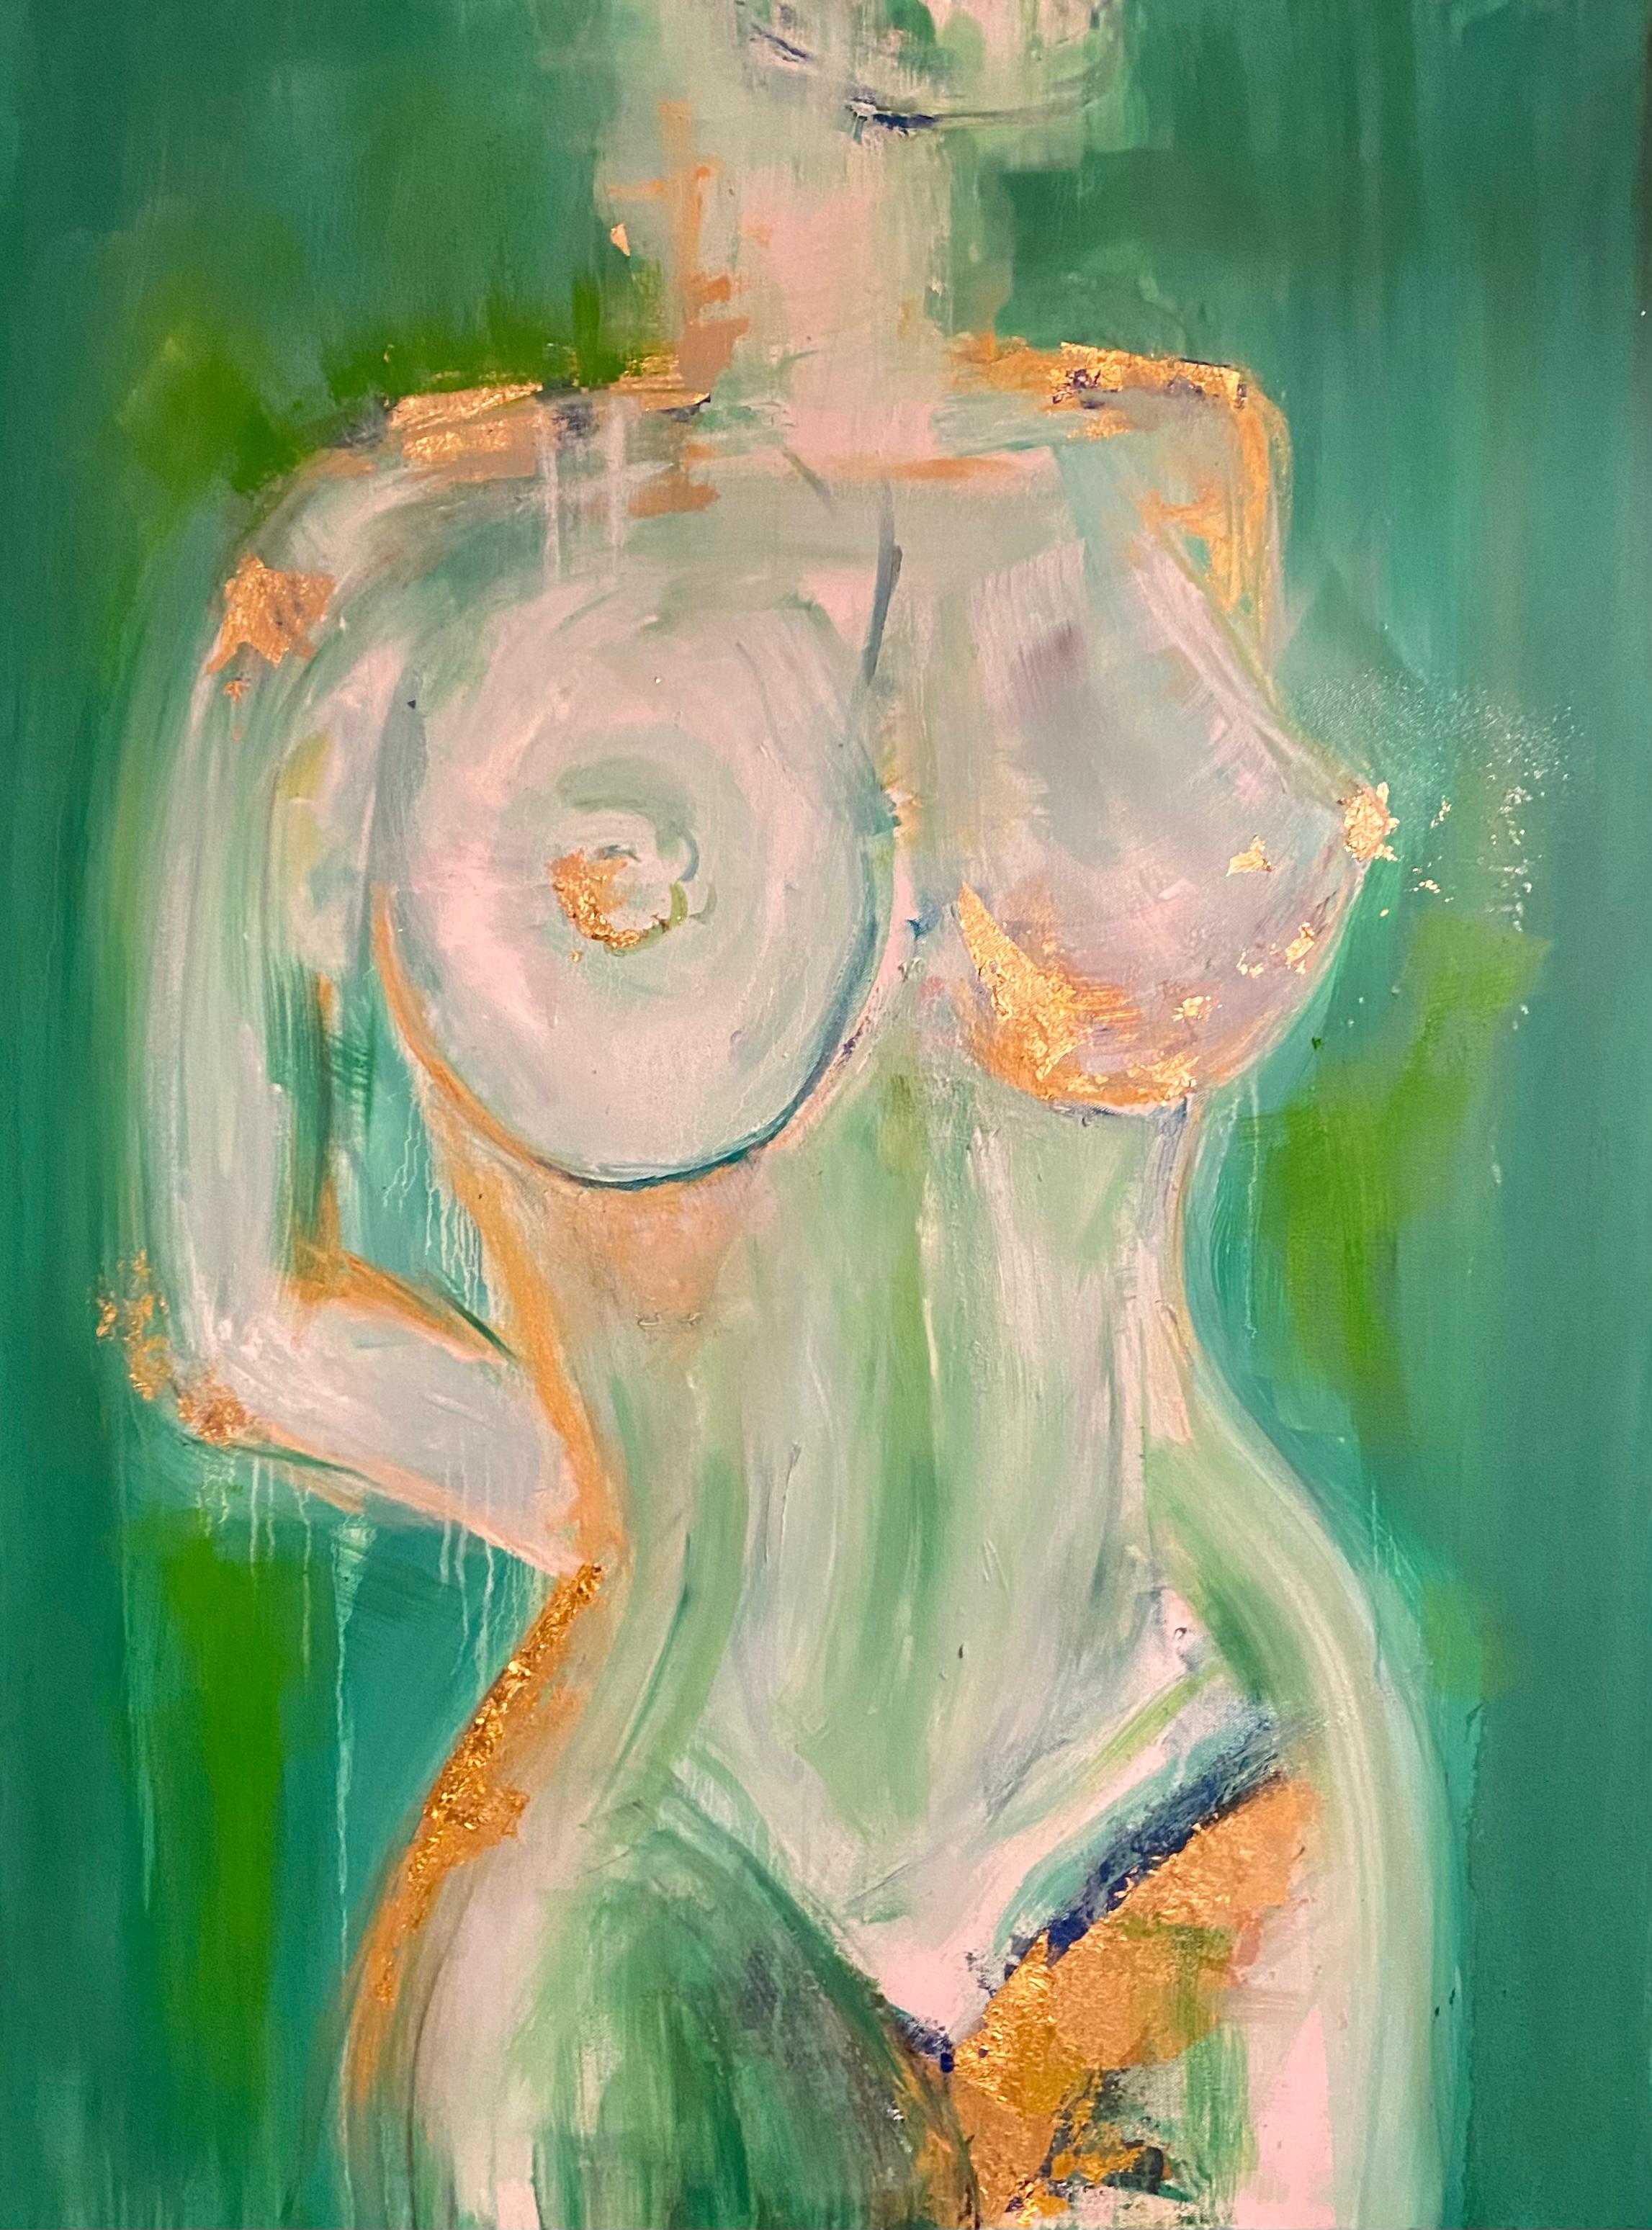 Green & Gold Sensuality - Mixed Media Art by Angelika Richter